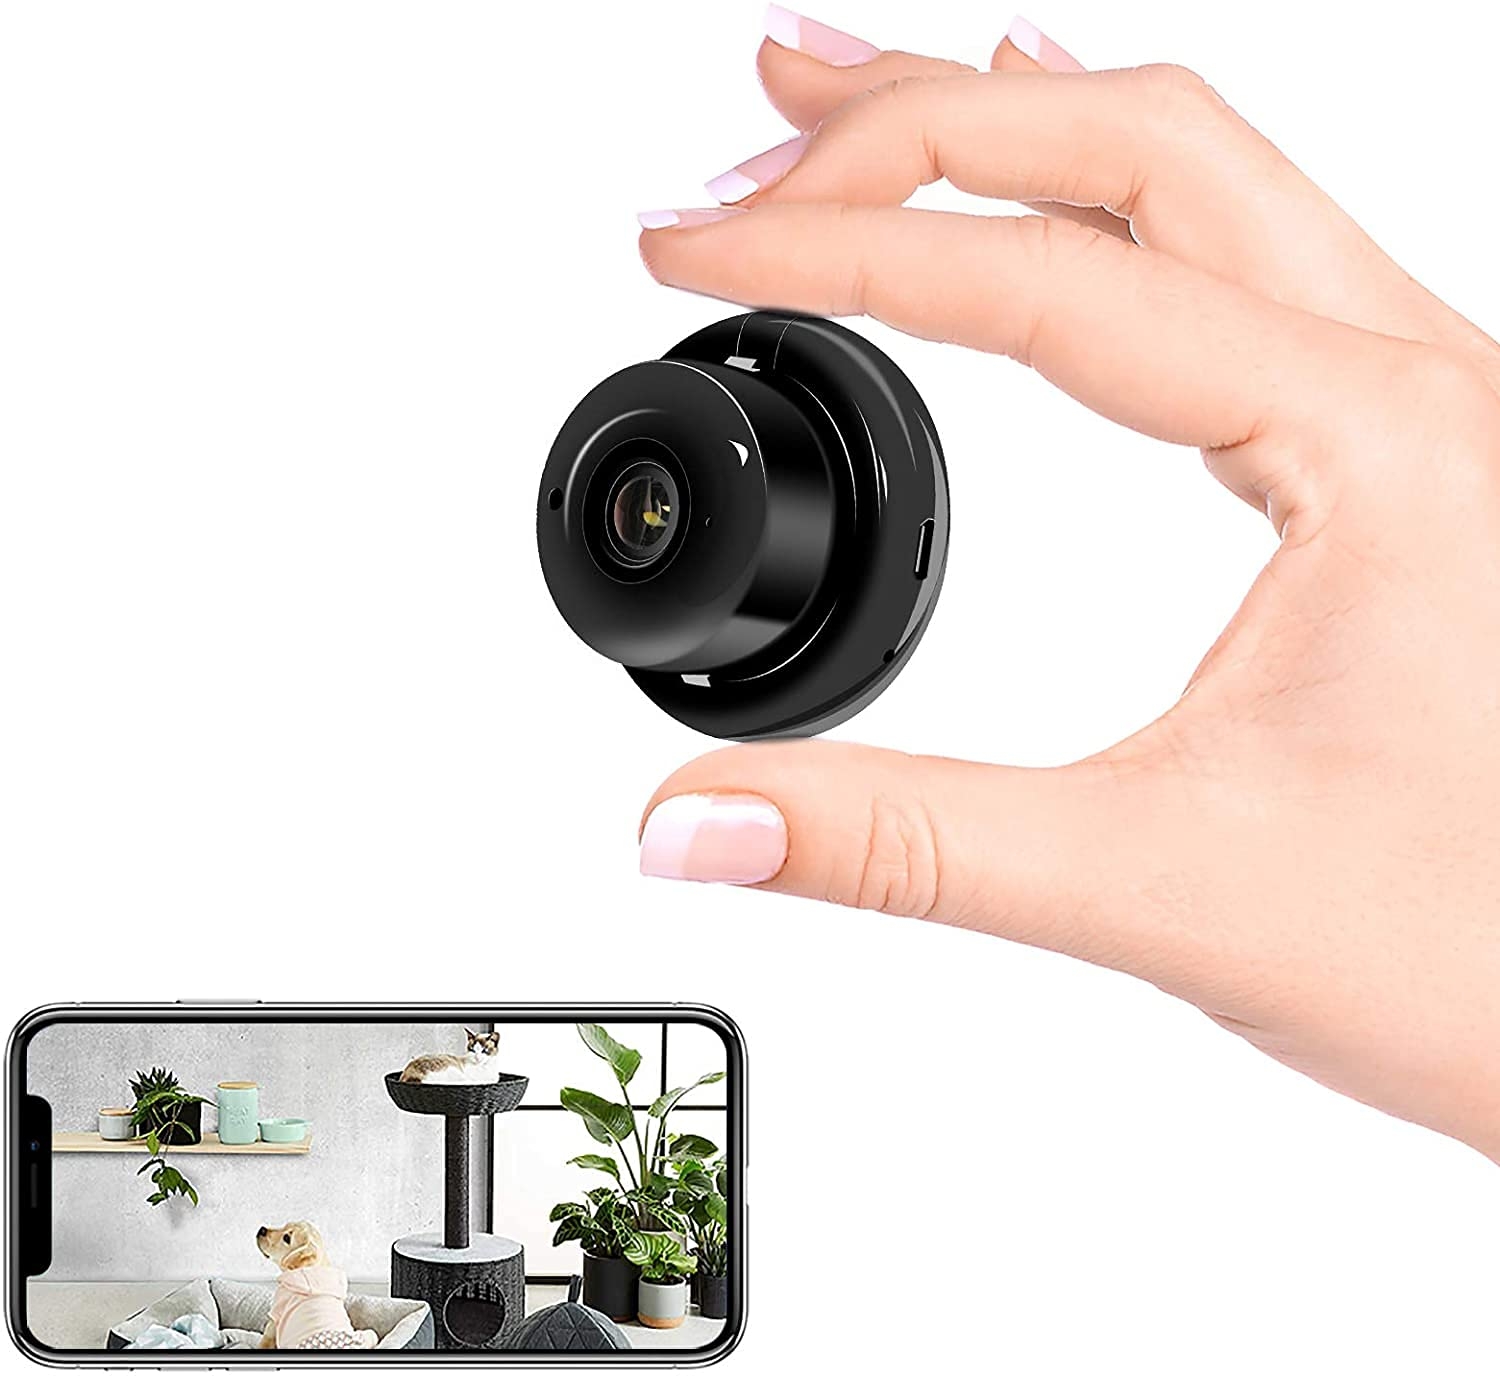 AUSHA® Security Camera-1080P WiFi Security Camera with Audio and Video- Nanny Camera with Night Vision, Smart Motion Detection for Home & Office